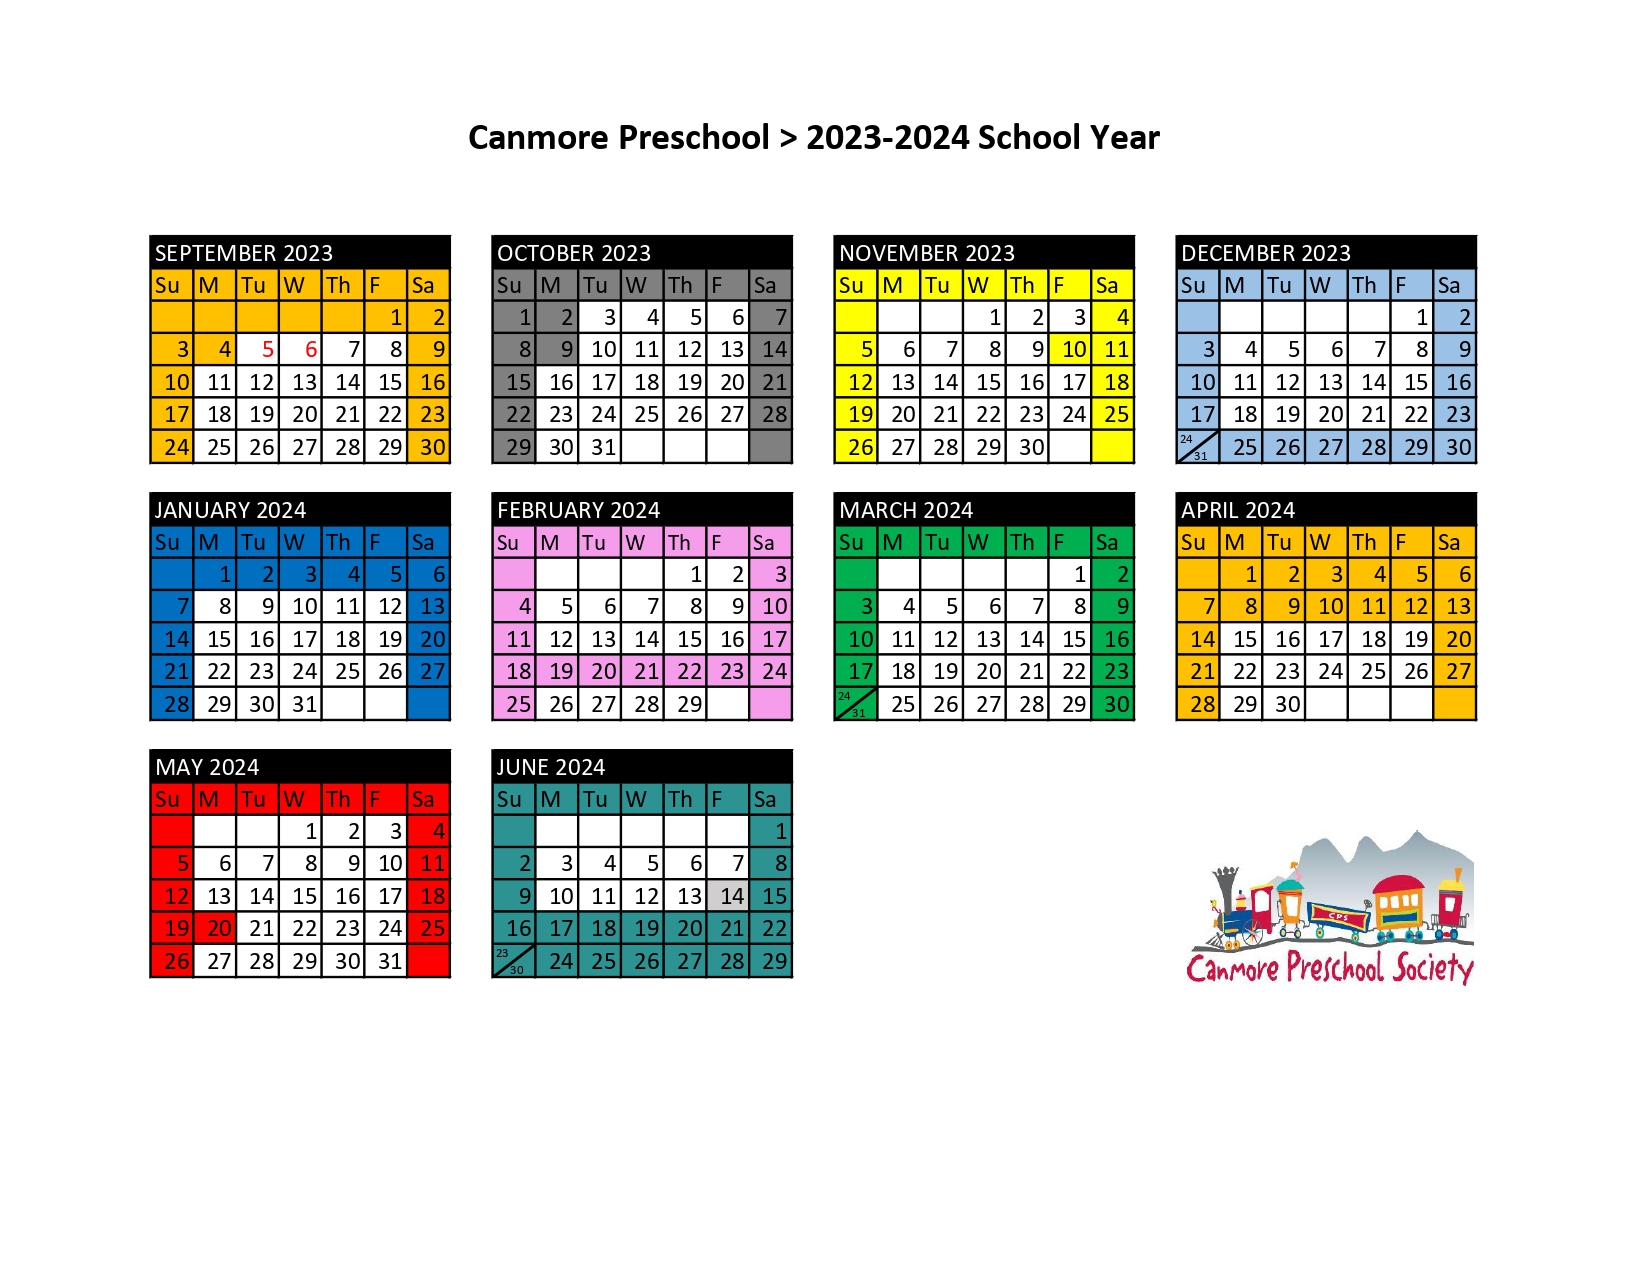 School Year Calendar_pages-to-jpg-0001